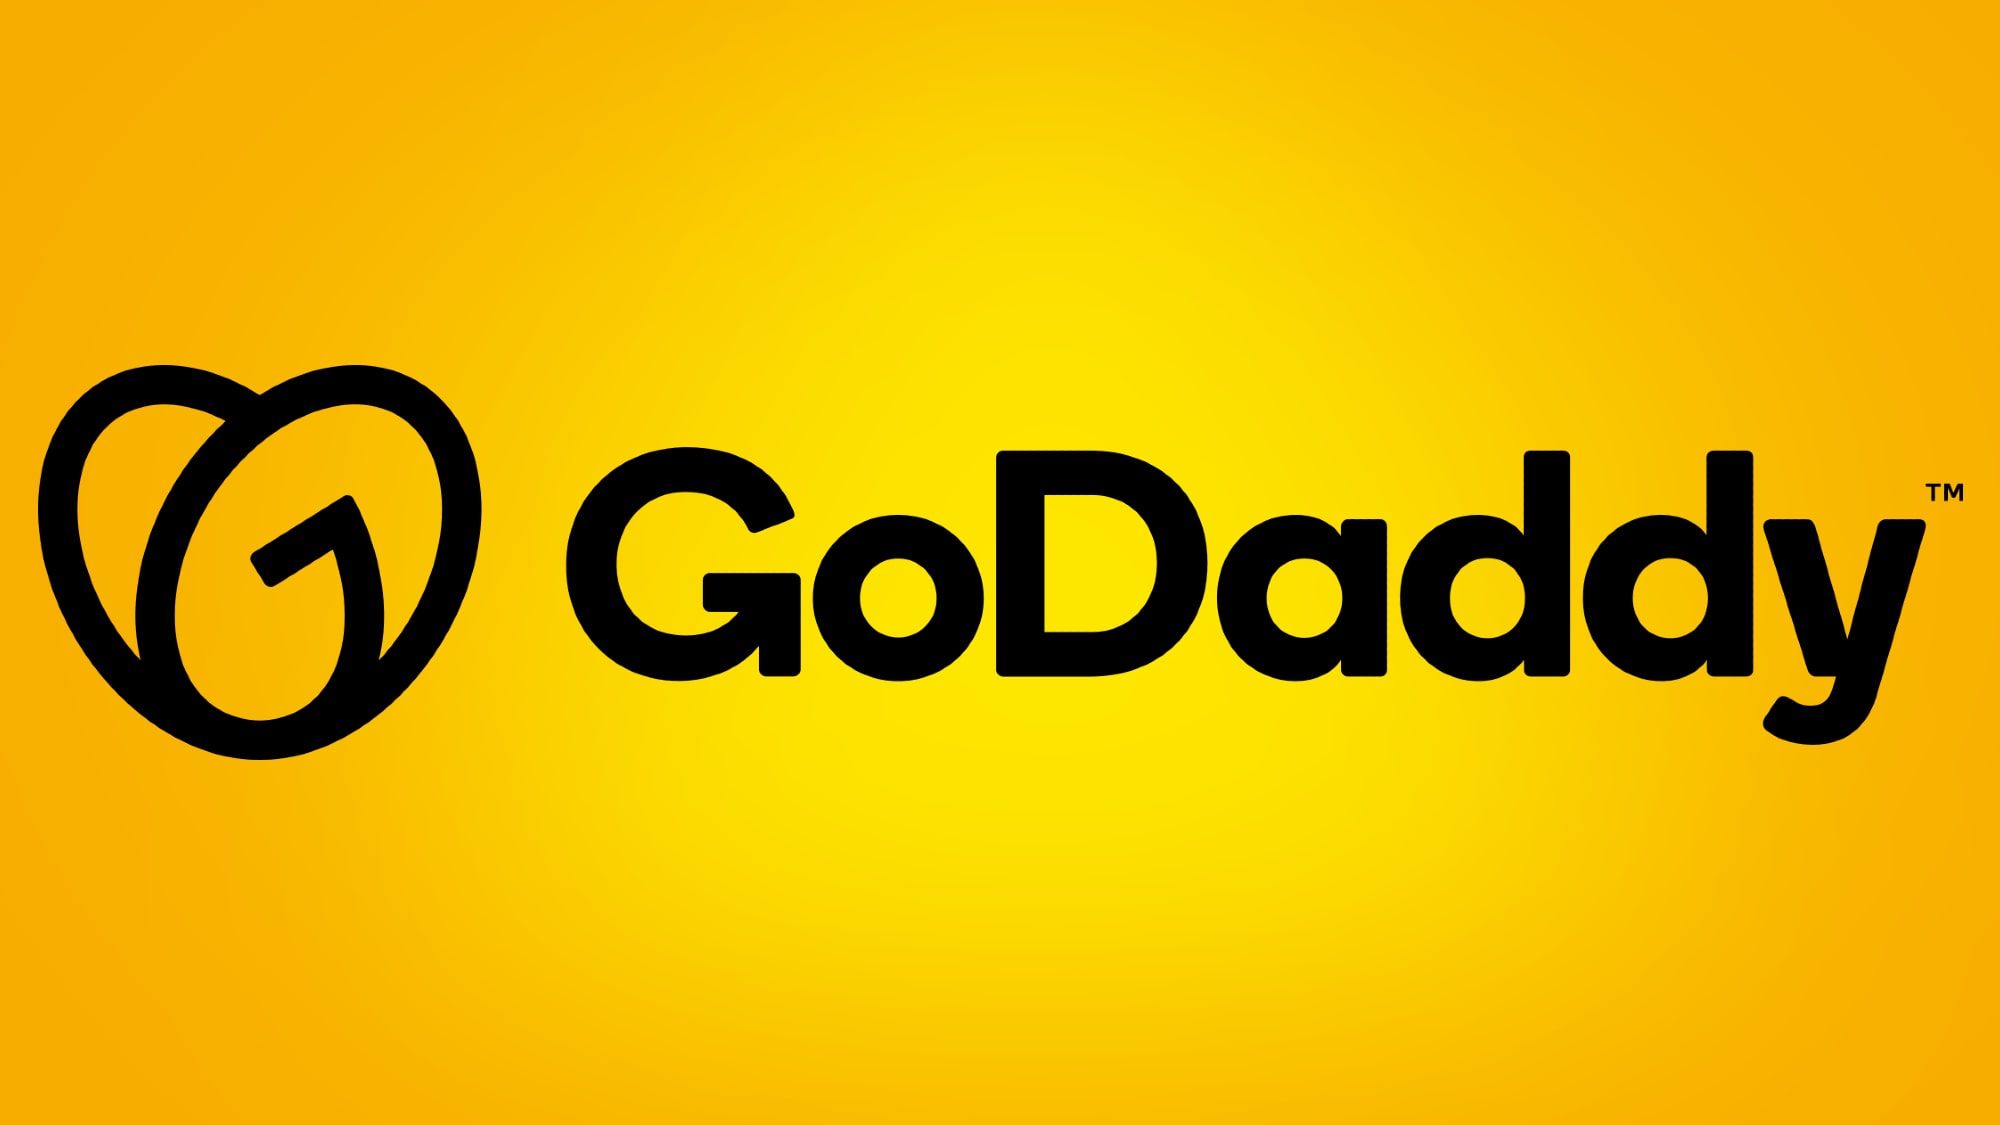 About .com Domain Godaddy